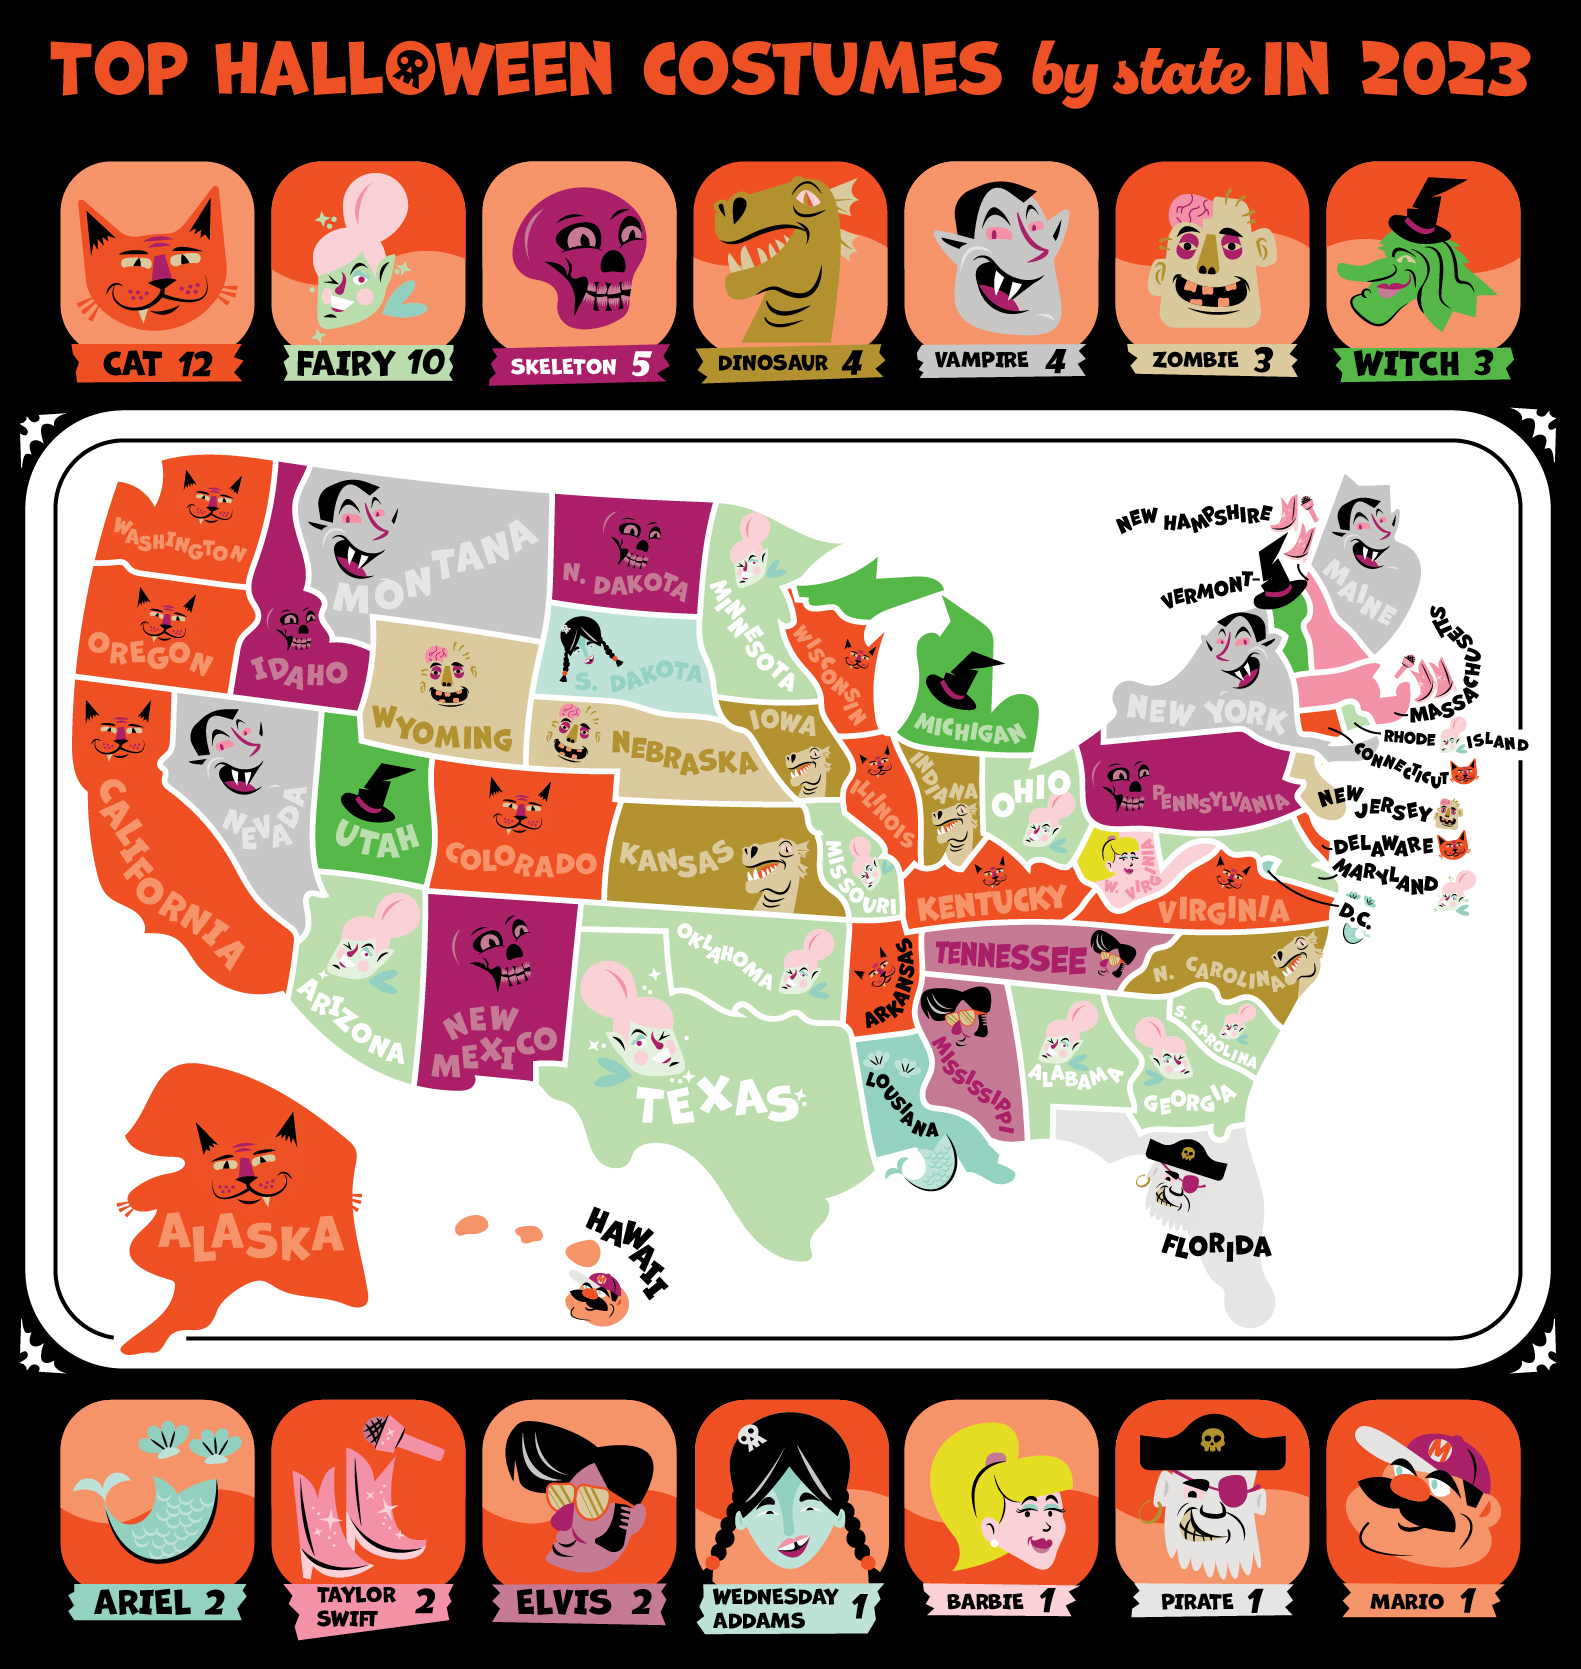 a data visualization of the most popular halloween costumes in every state in the US